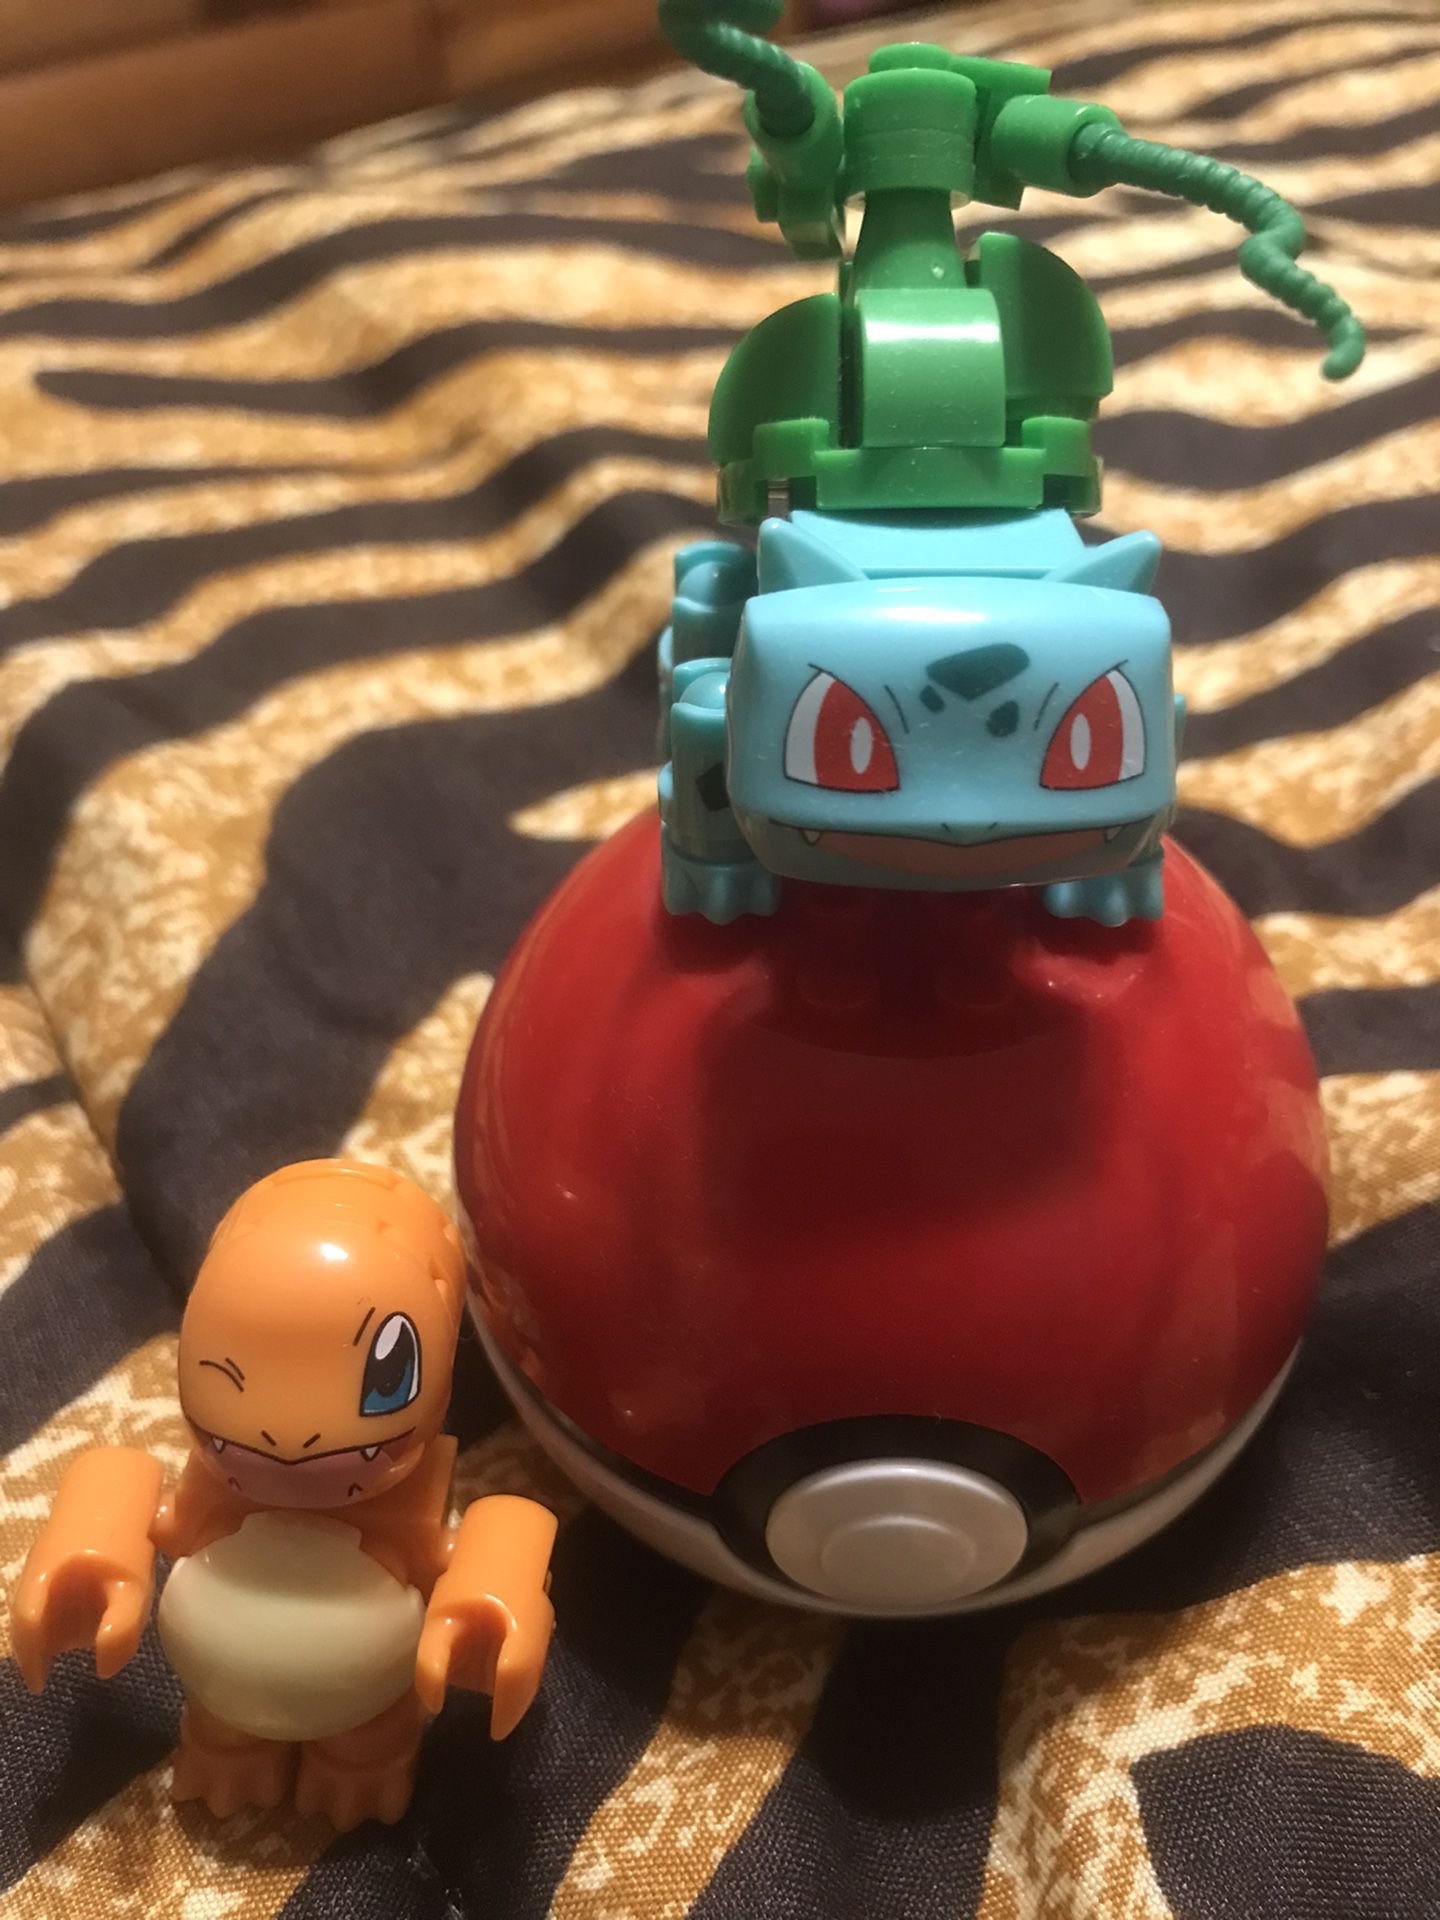 Pair of two Pokemon charmander and bulbasaur Mega Construx Character figures